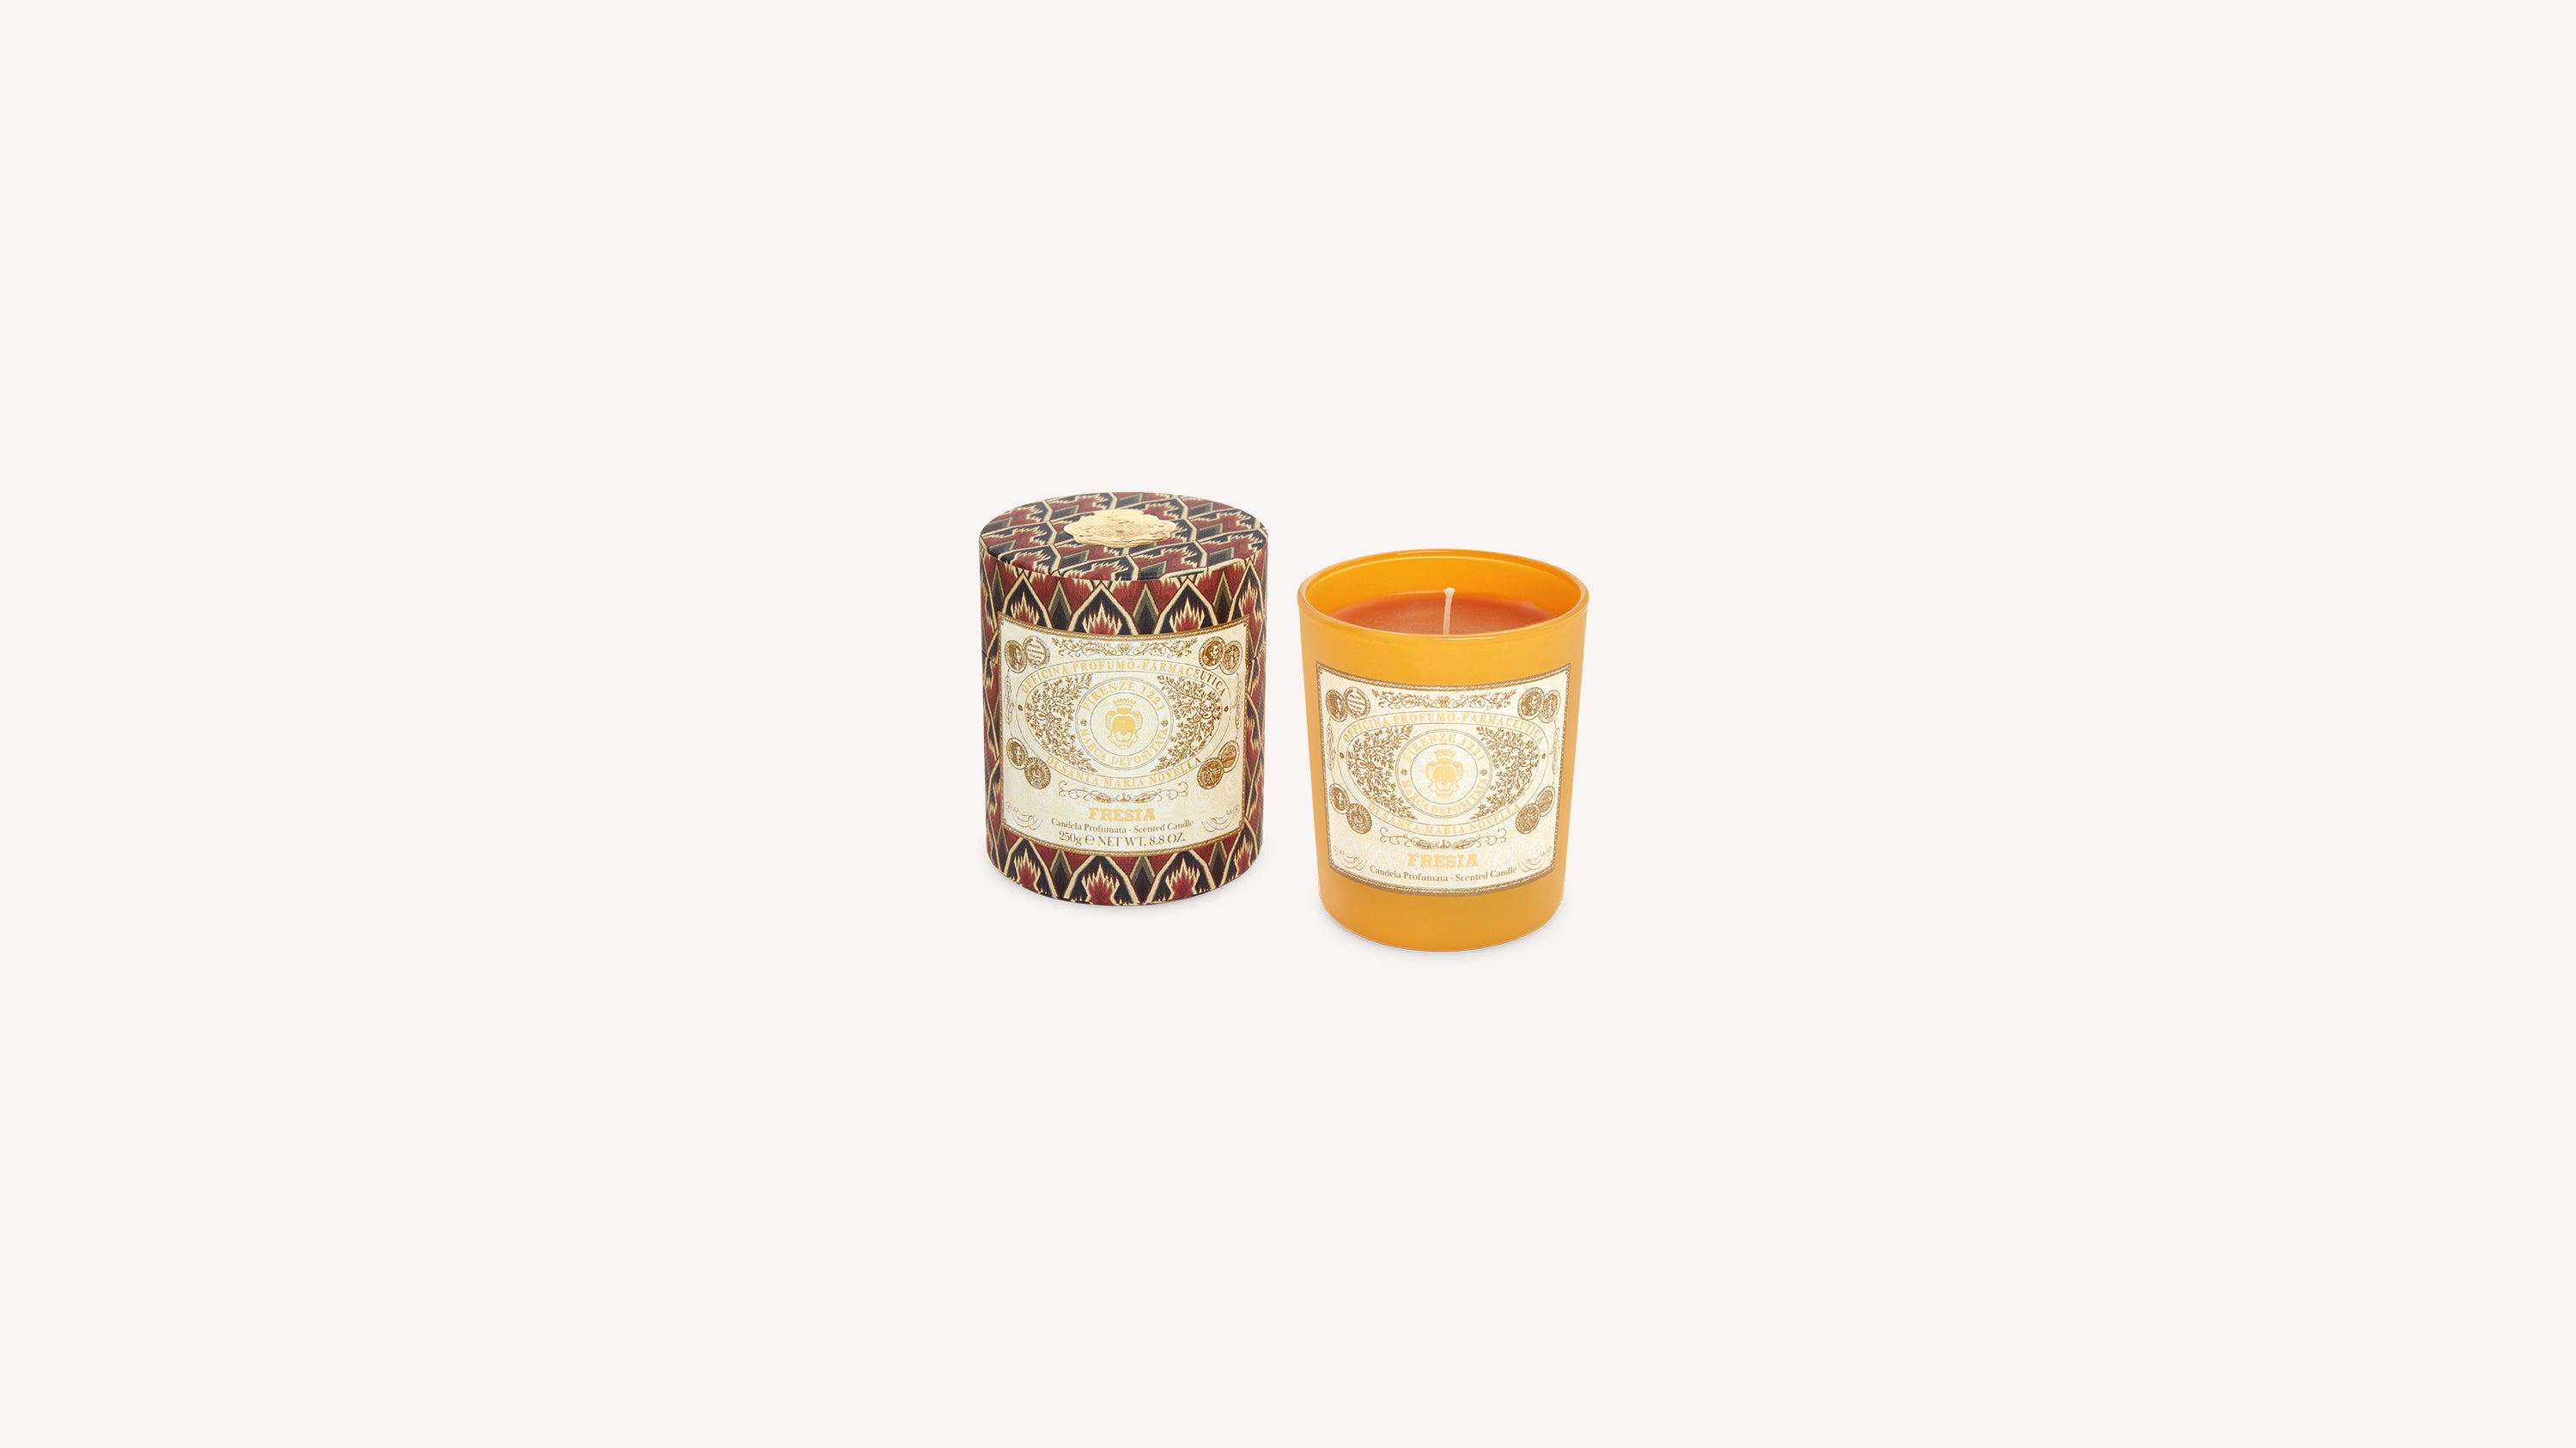 Fresia Scented Candle